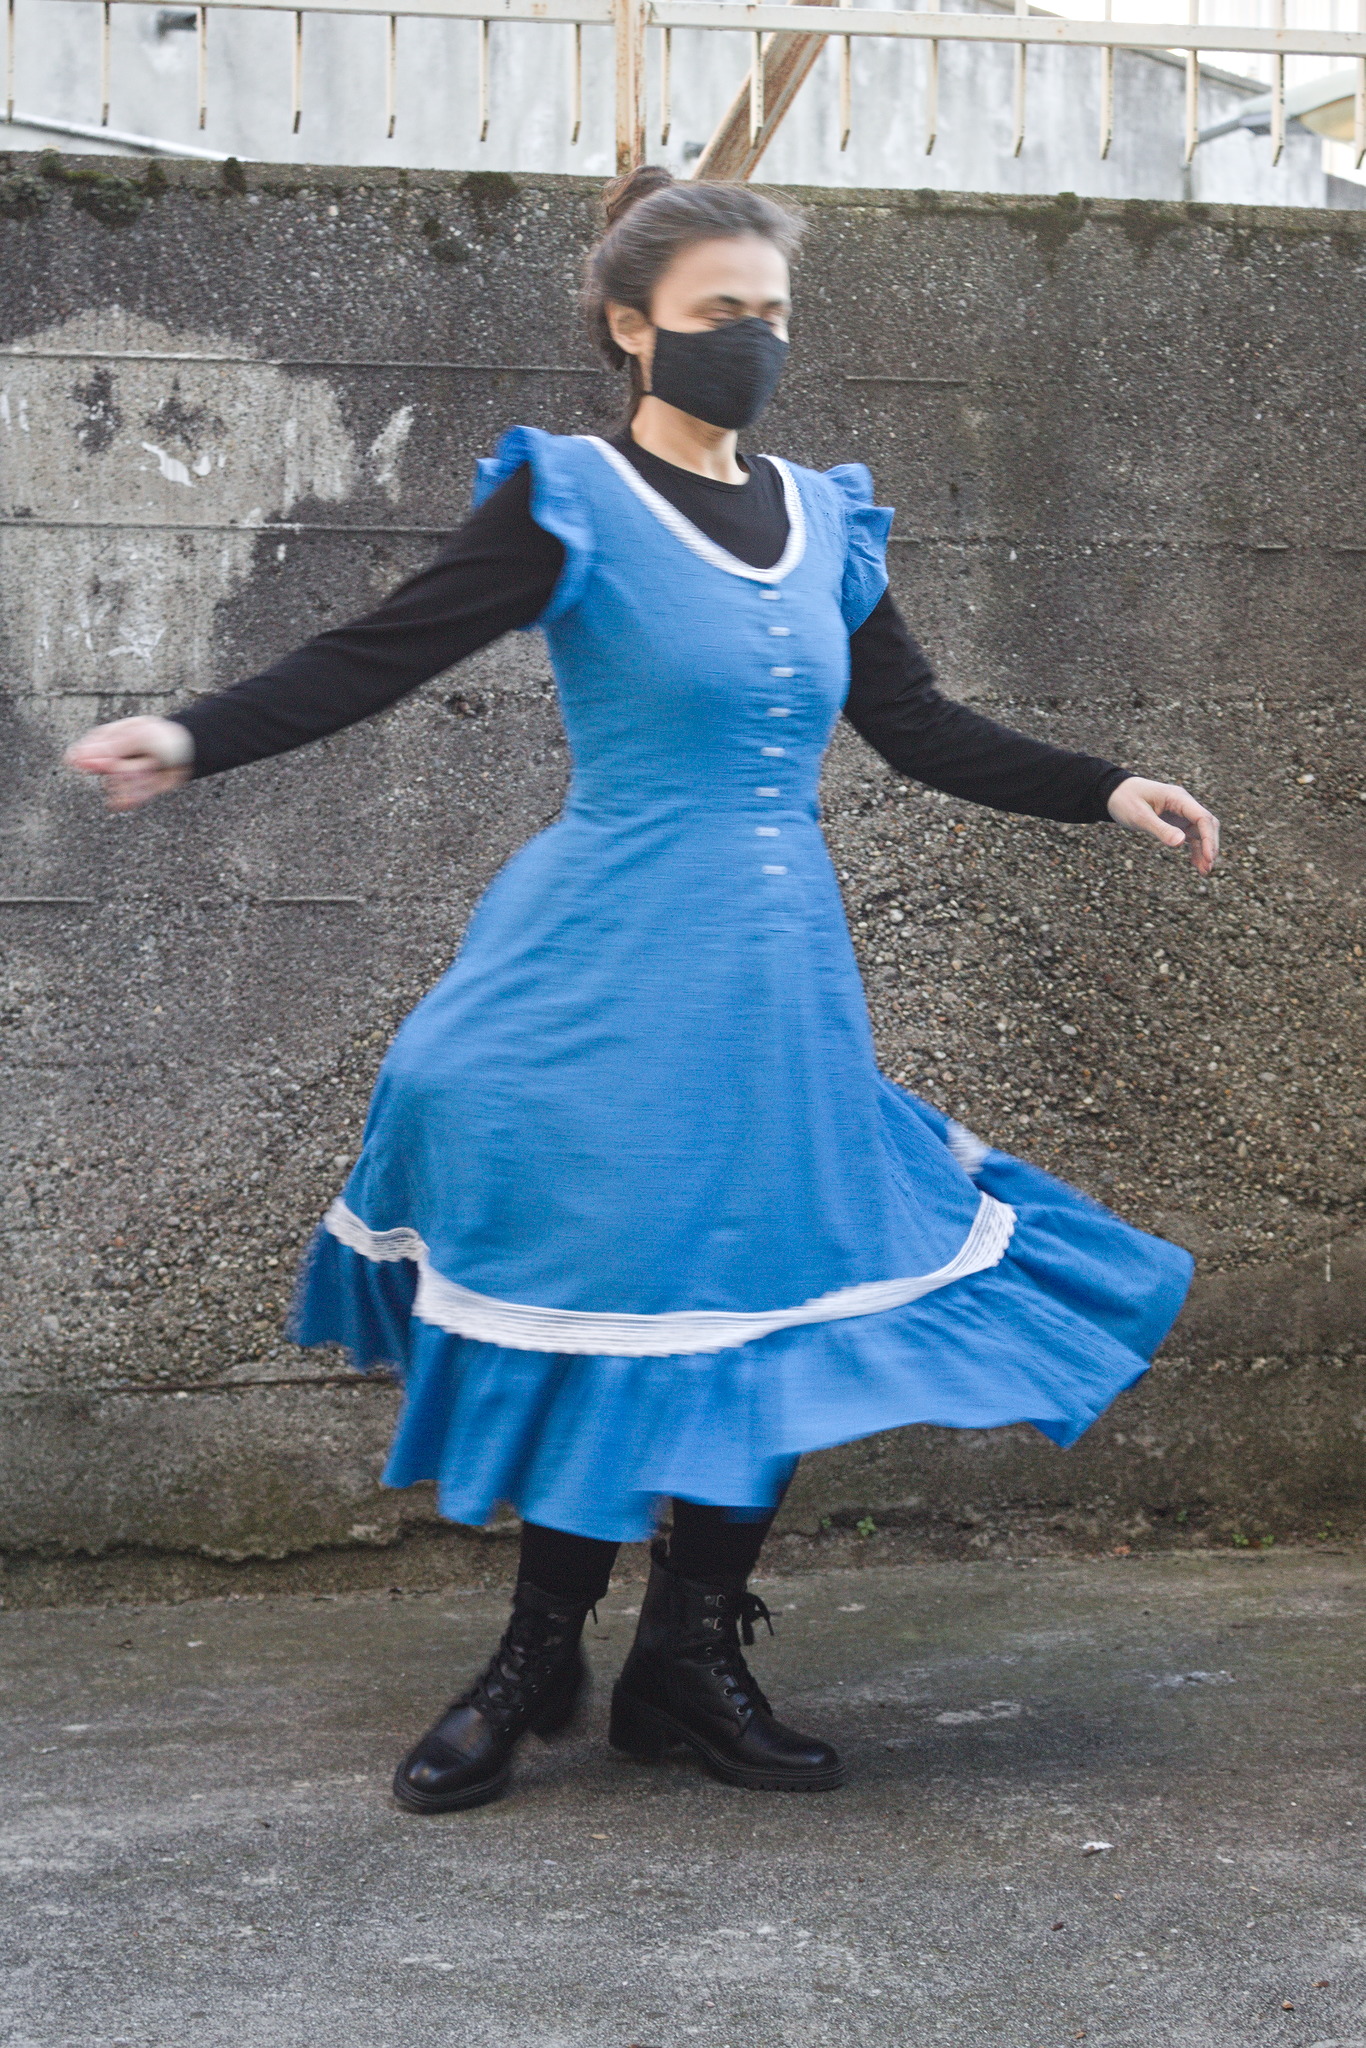 a person spinning on herself, the skirt and the ruffle are
swishing out. Something in the pocket worn under the dress is
causing a bit of bulge on one side.